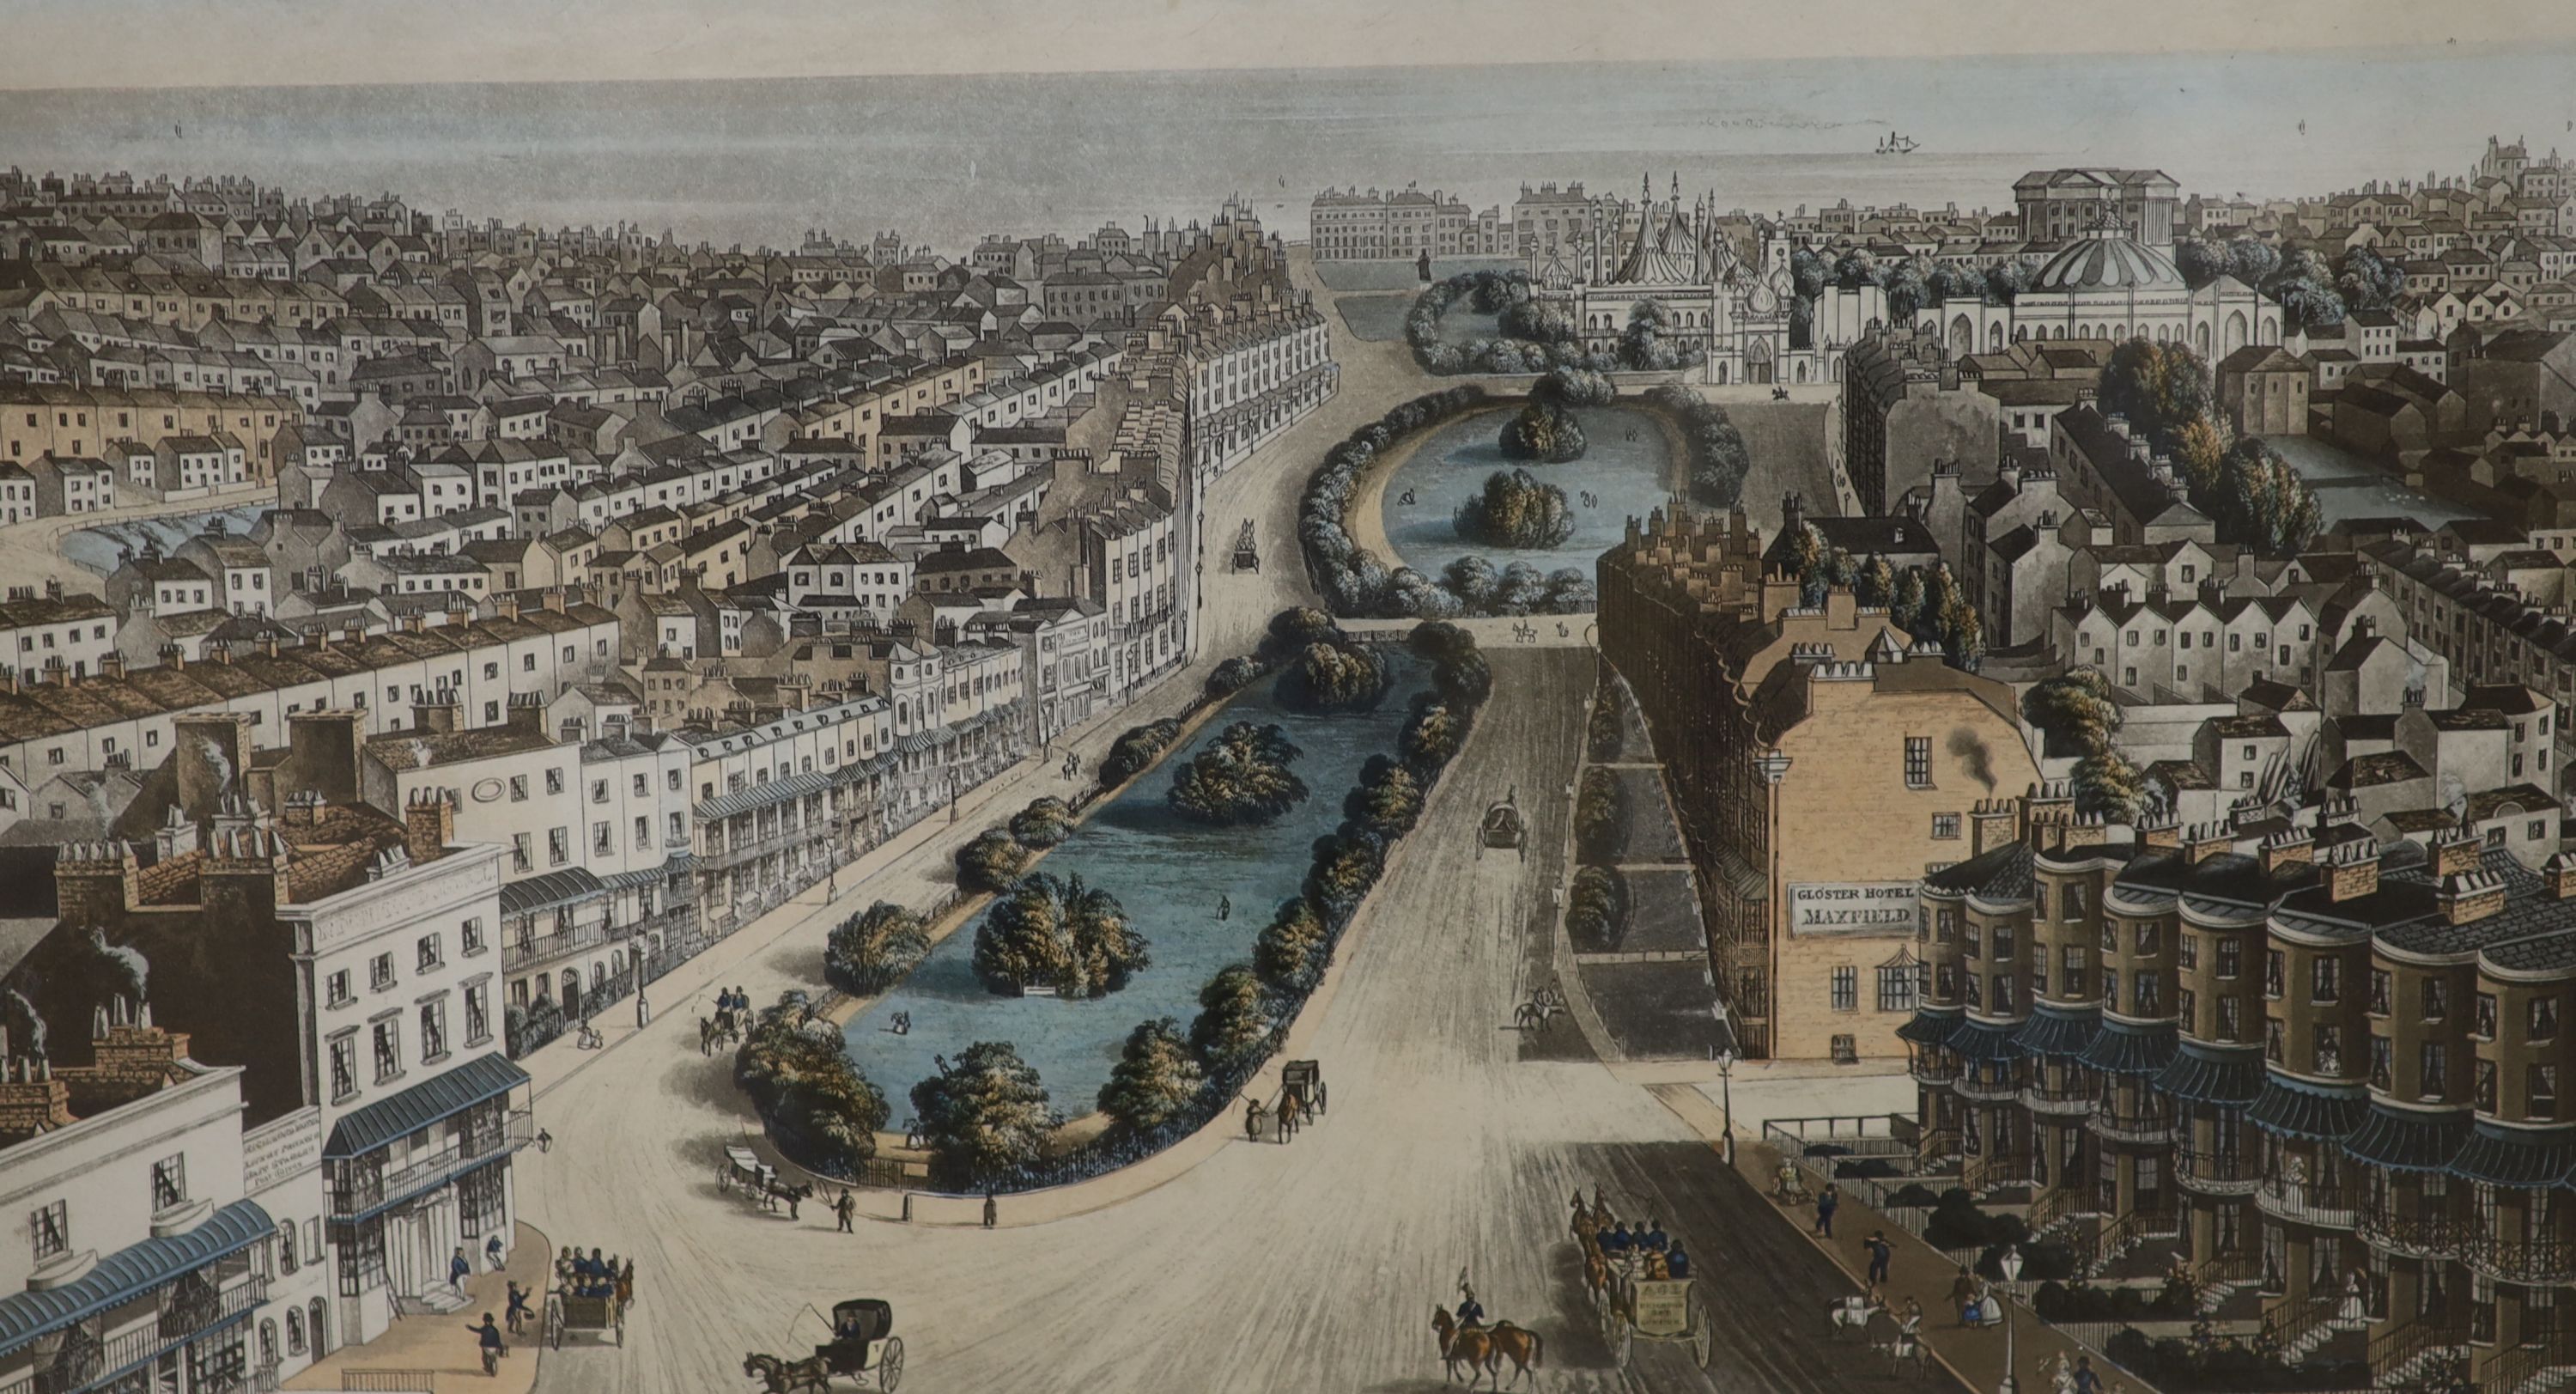 John Bruce 1839, coloured aquatint, A Birds Eye View of Brighton, 29 x 41cm, a coloured lithograph, The Inundation of Pool Valley 18